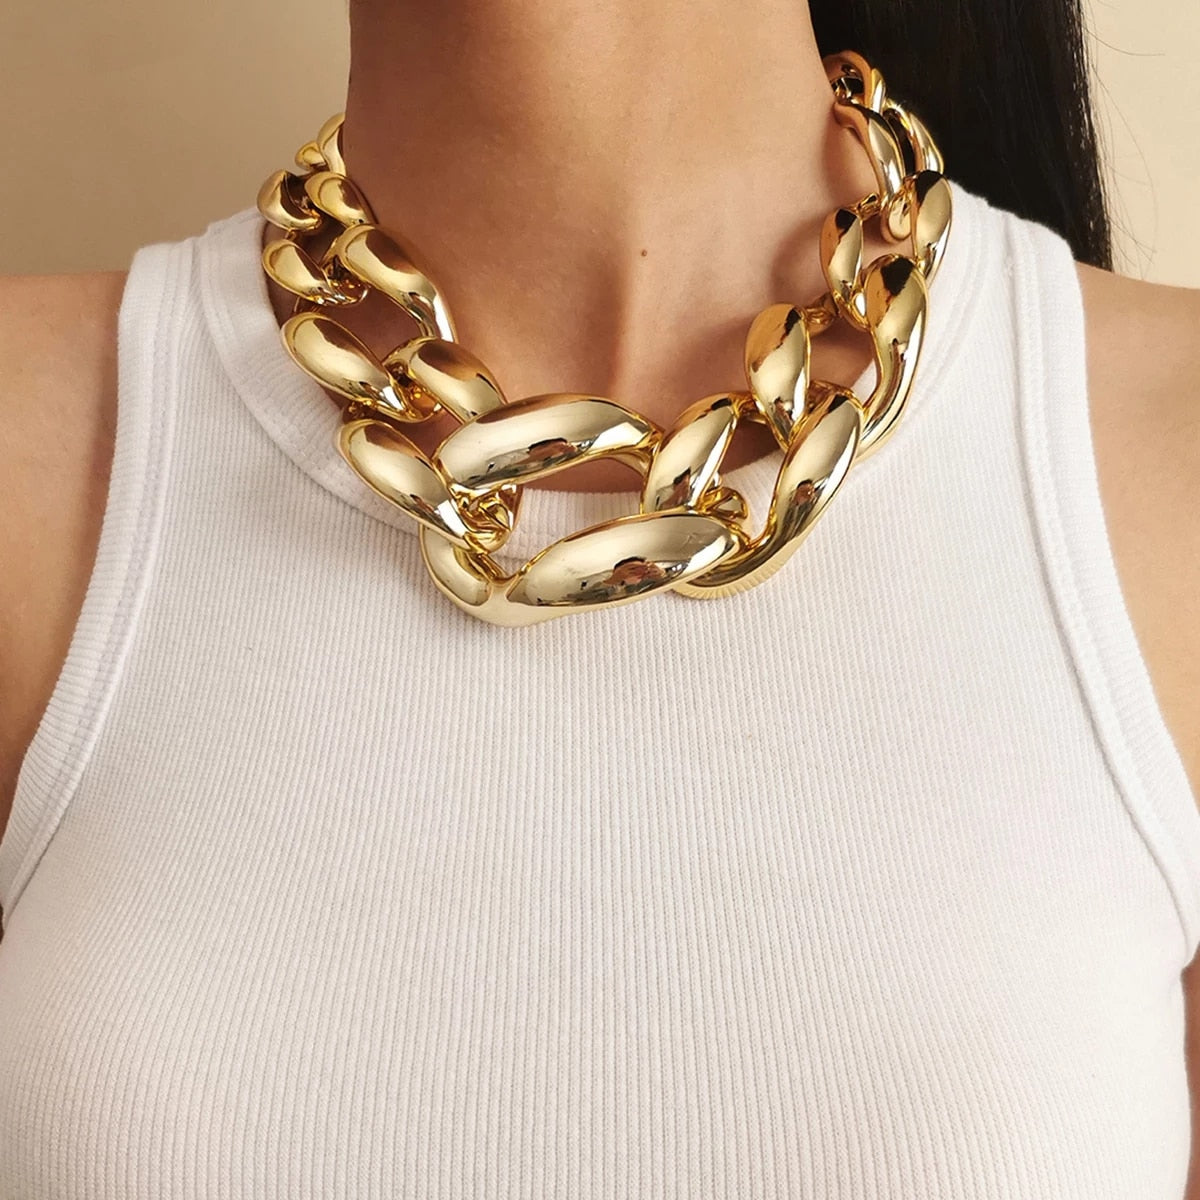 Chunky Linked Necklaces - Tilly Sveaas Jewellery